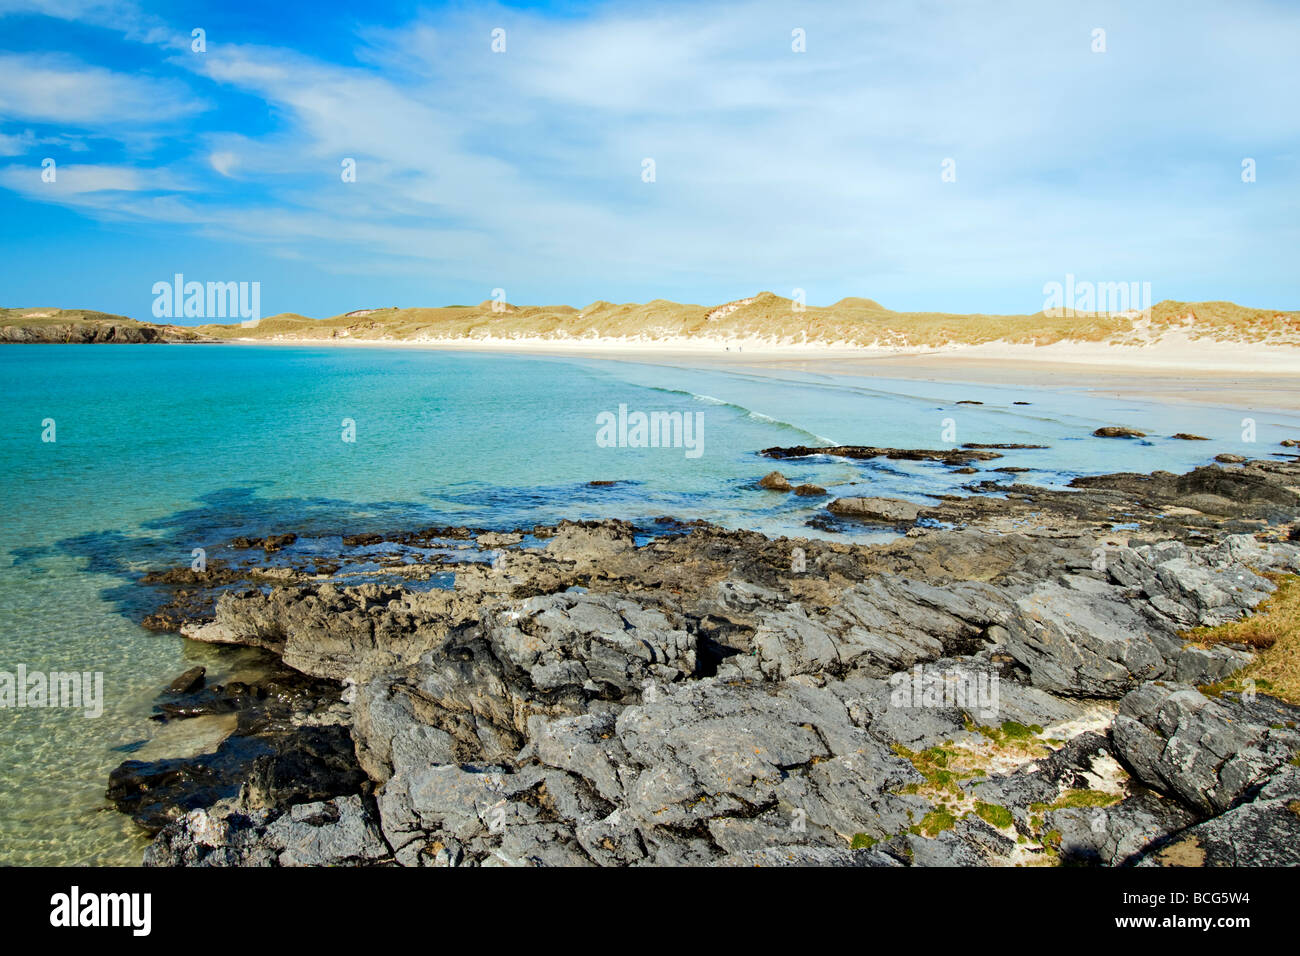 Stunning sandy beach and bay of Balnakeil Bay, Durness, Sutherland in Scotland looking out towards Faraid Head Stock Photo